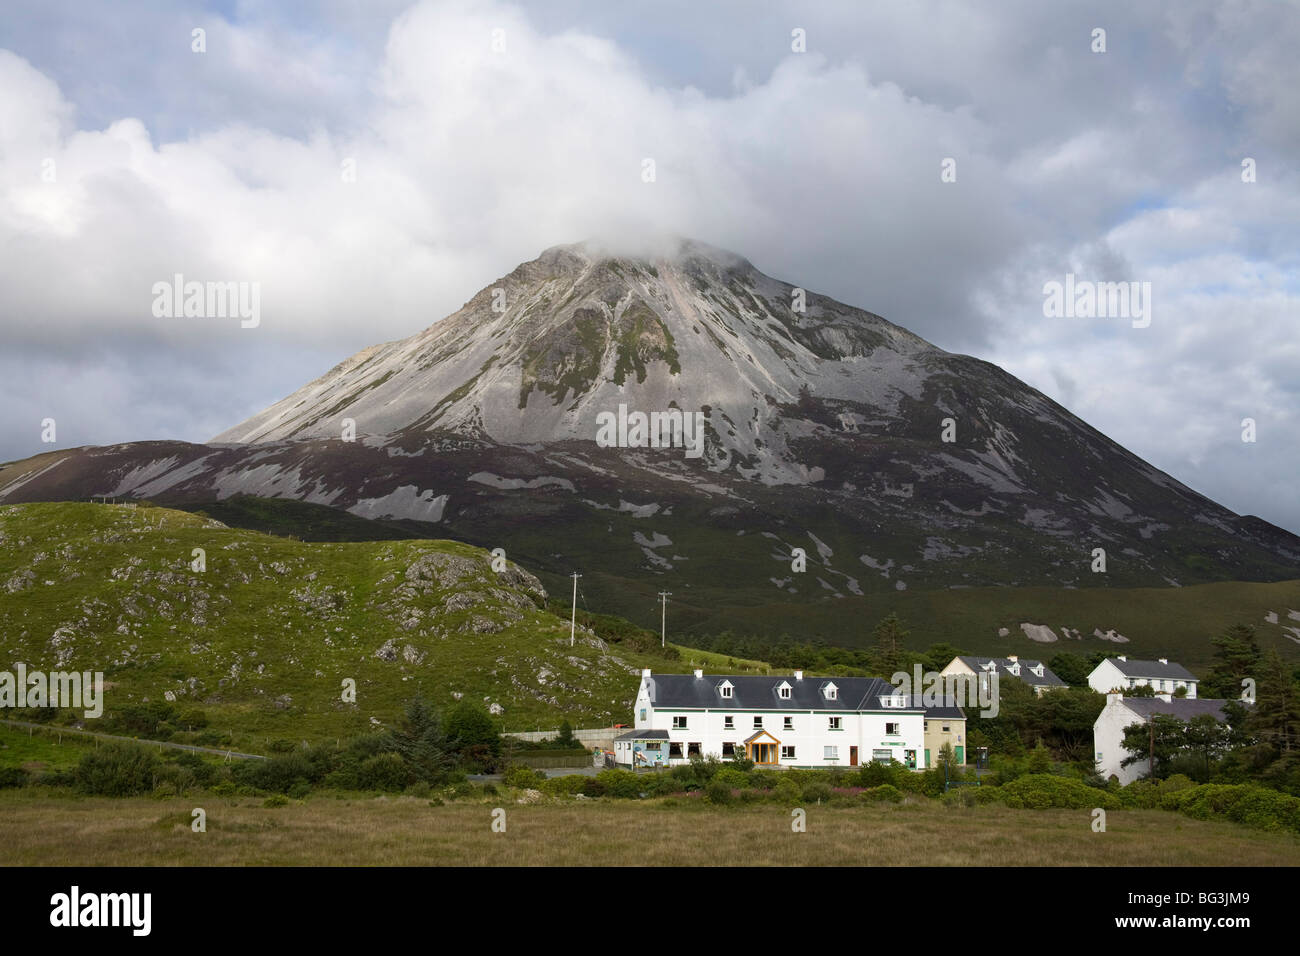 Mount Errigal und Dunlewy Dorf, County Donegal, Ulster, Republik Irland, Europa Stockfoto